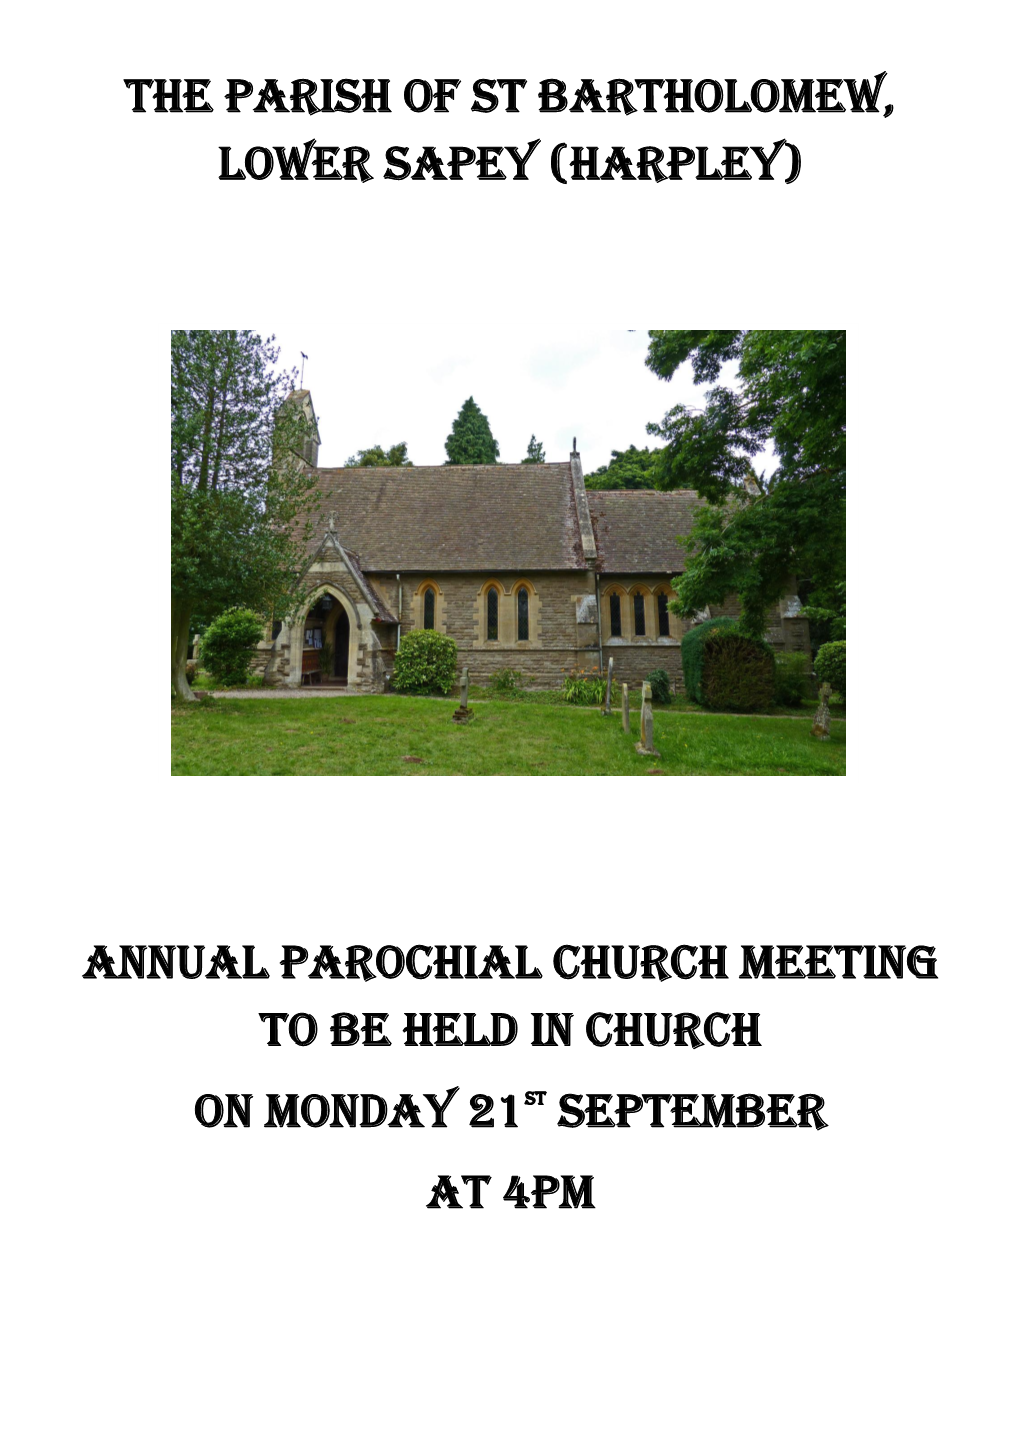 The Parish of St BARTHOLOMEW, LOWER SAPEY (HARPLEY) Annual Parochial Church Meeting to Be Held in Church on Monday 21St Septemb